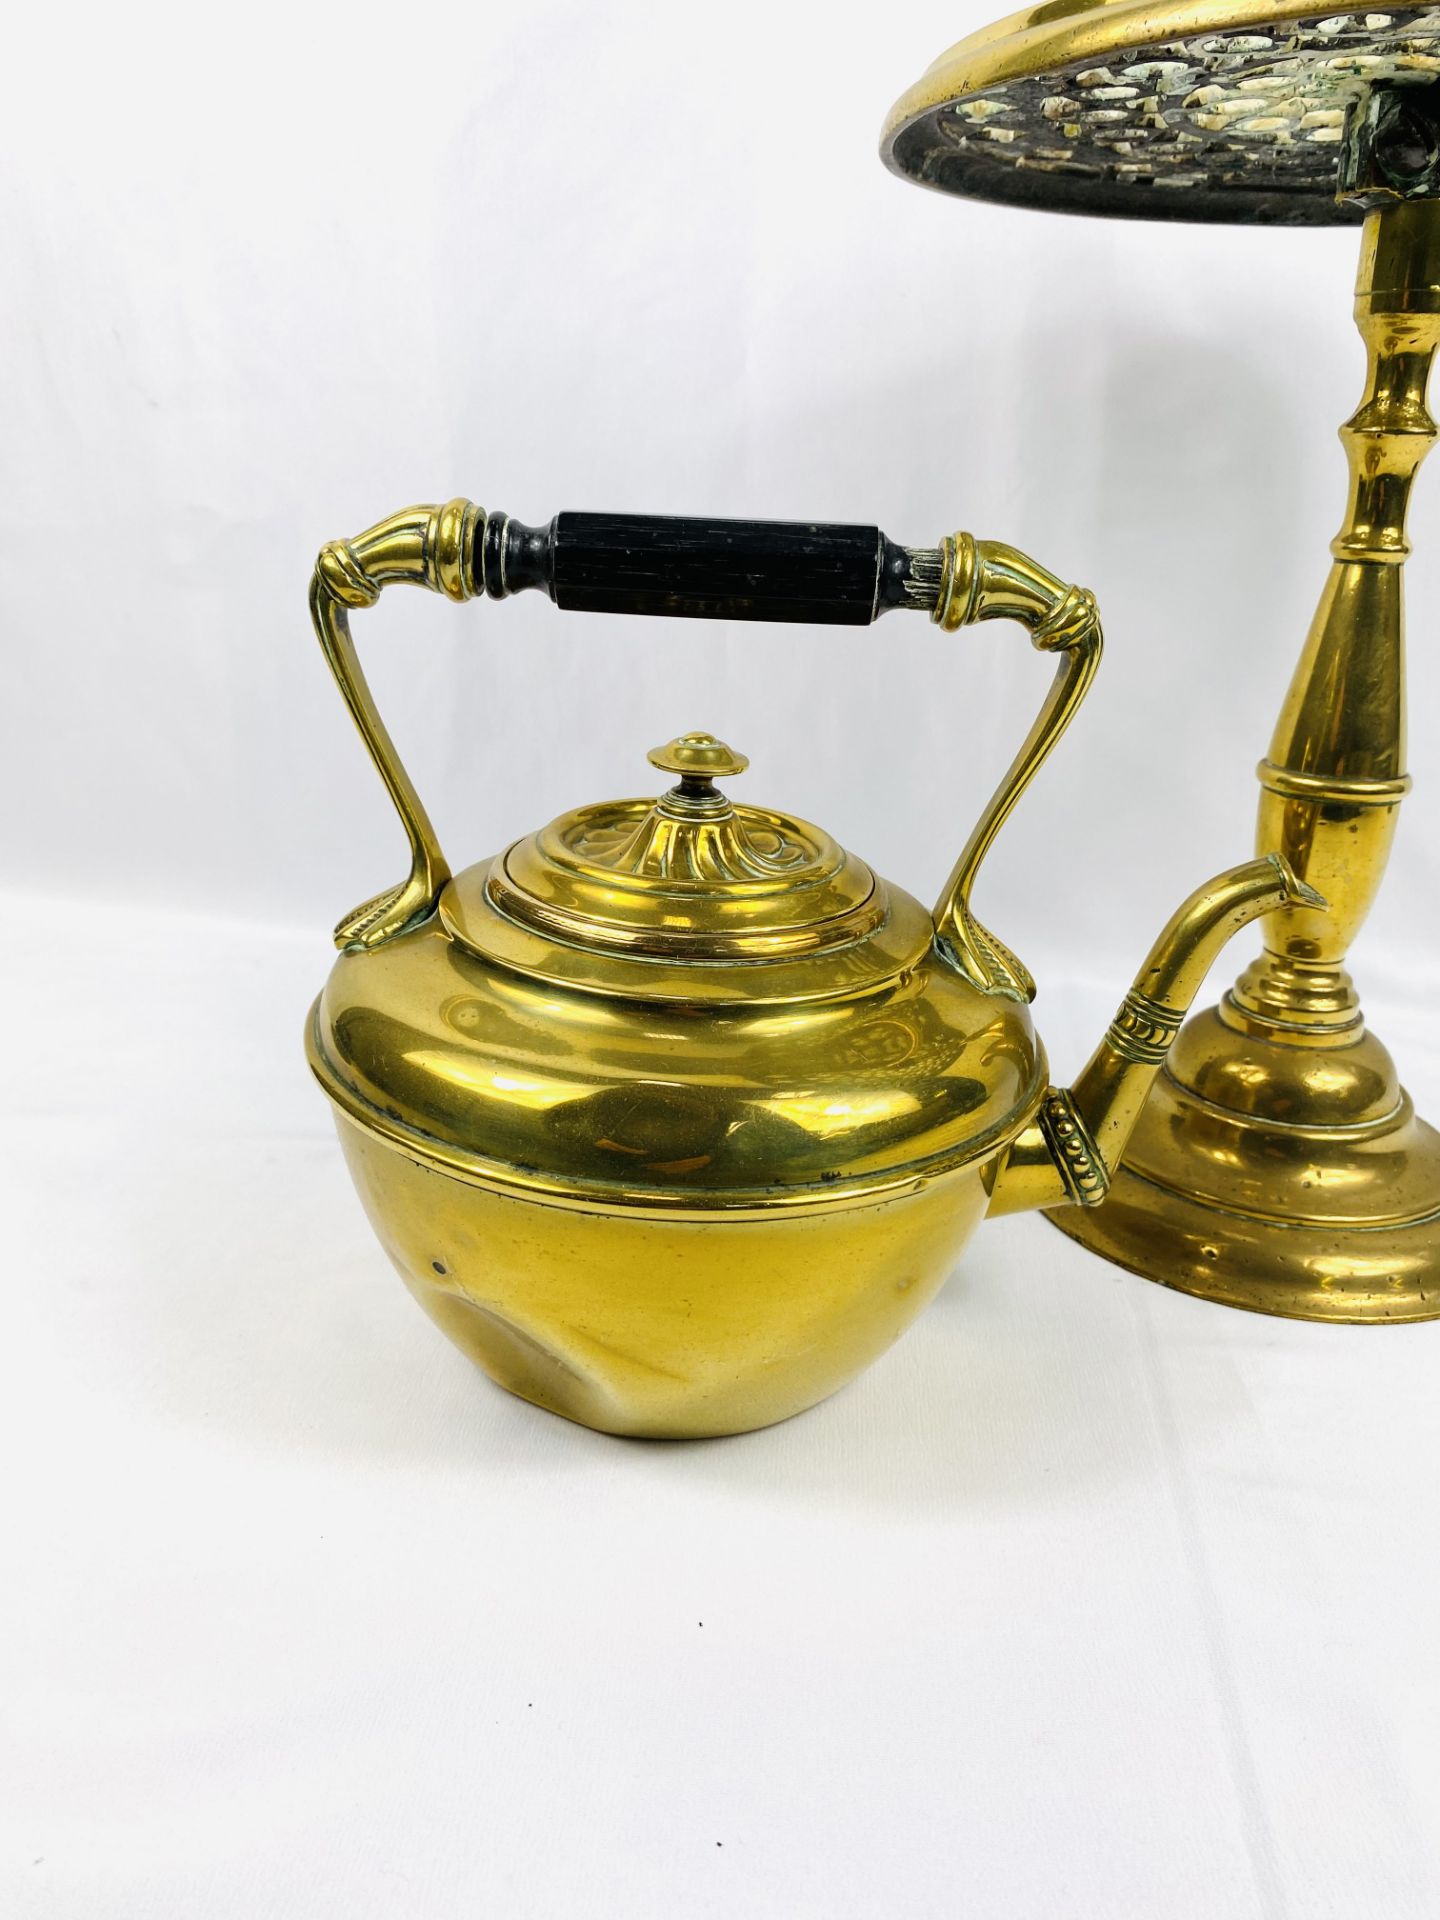 Brass kettle stand with brass kettle - Image 2 of 5